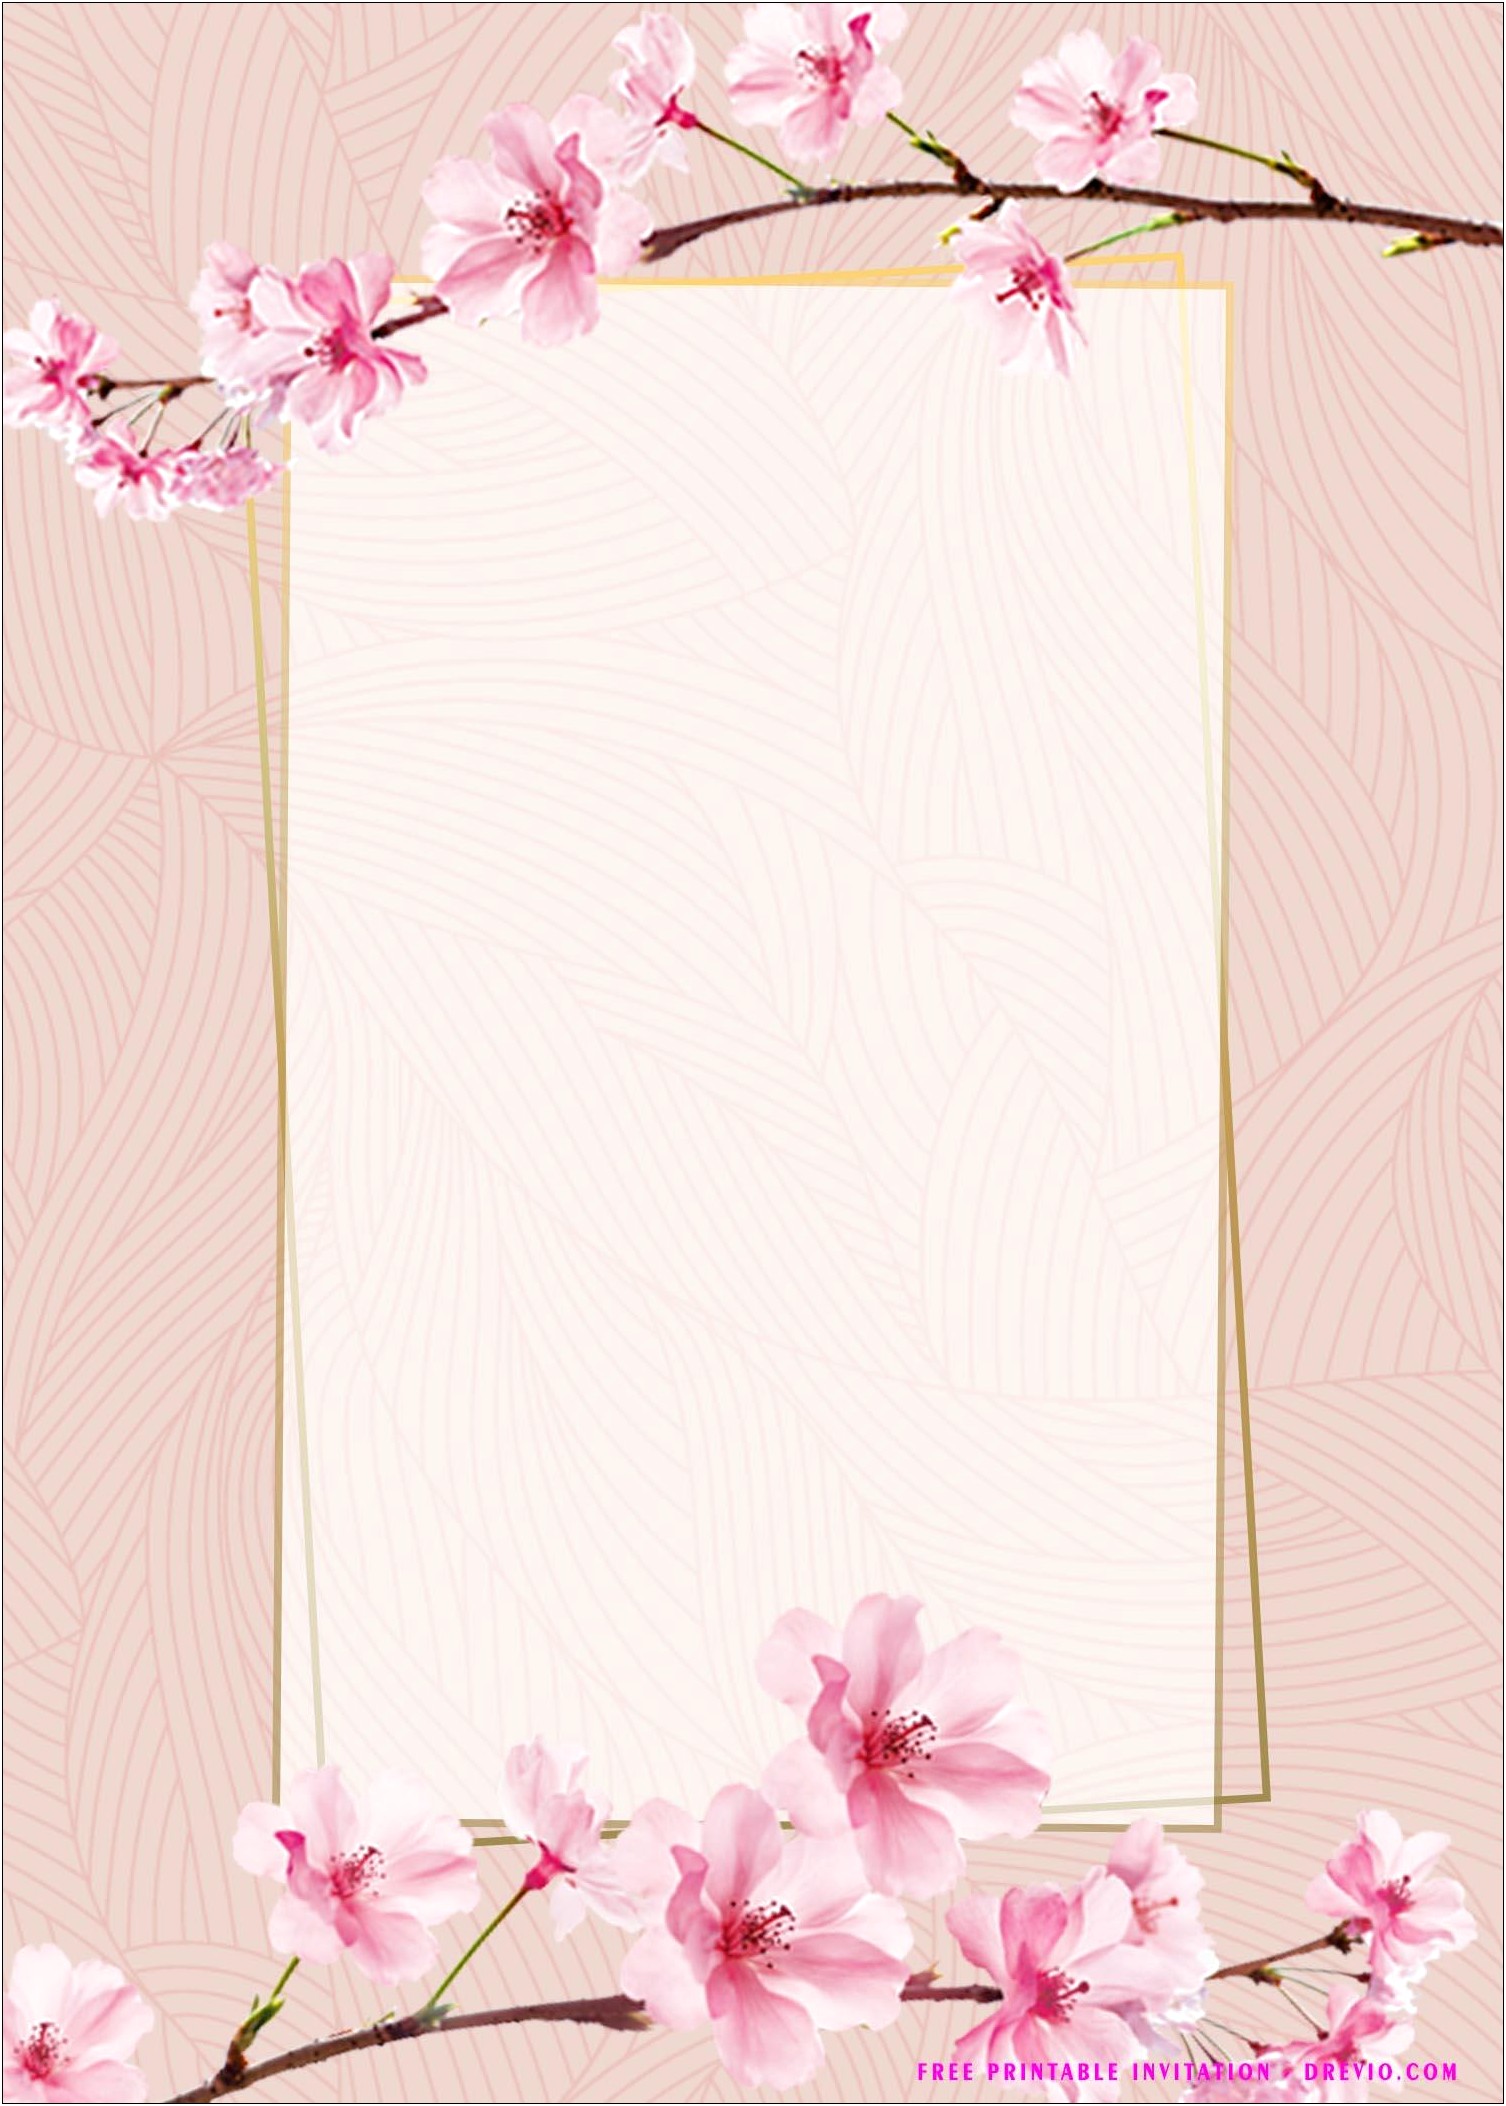 Surprise Party Templates For Free With Pink Flowers